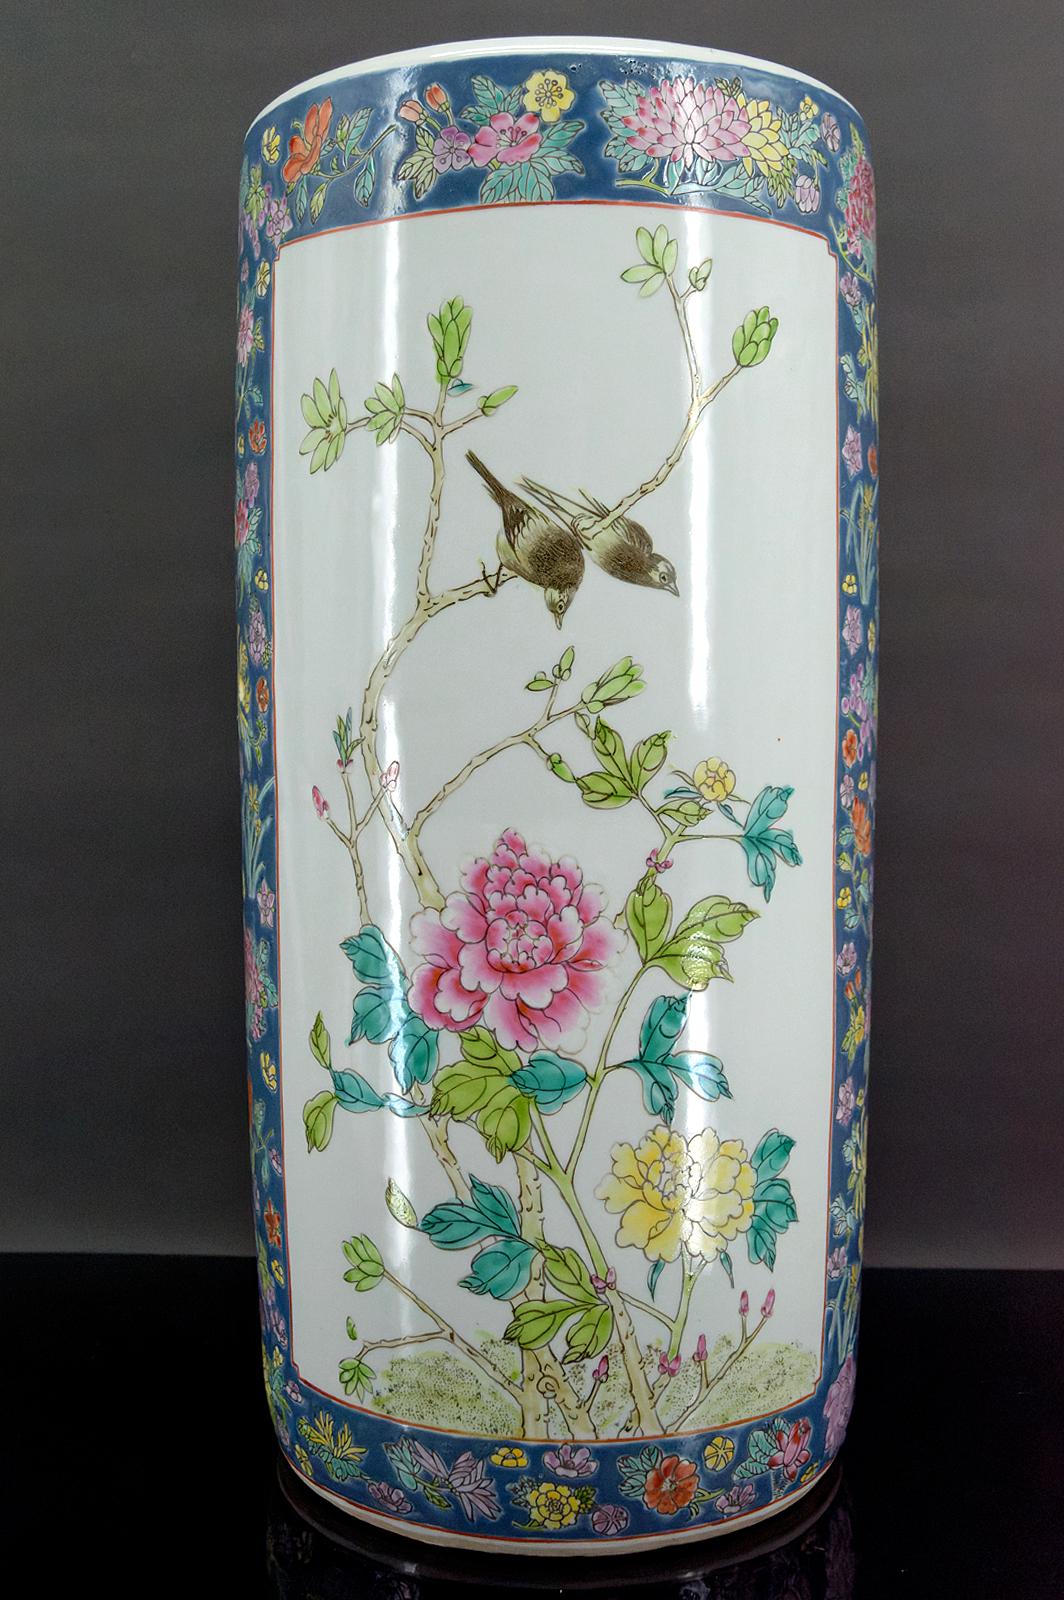 Important porcelain roller / tube vase with polychrome decoration of birds and flowers.

China, late Qing period, early 20th century.

Excellent condition.

Dimensions:
Height 46 cm
Diameter 23 cm